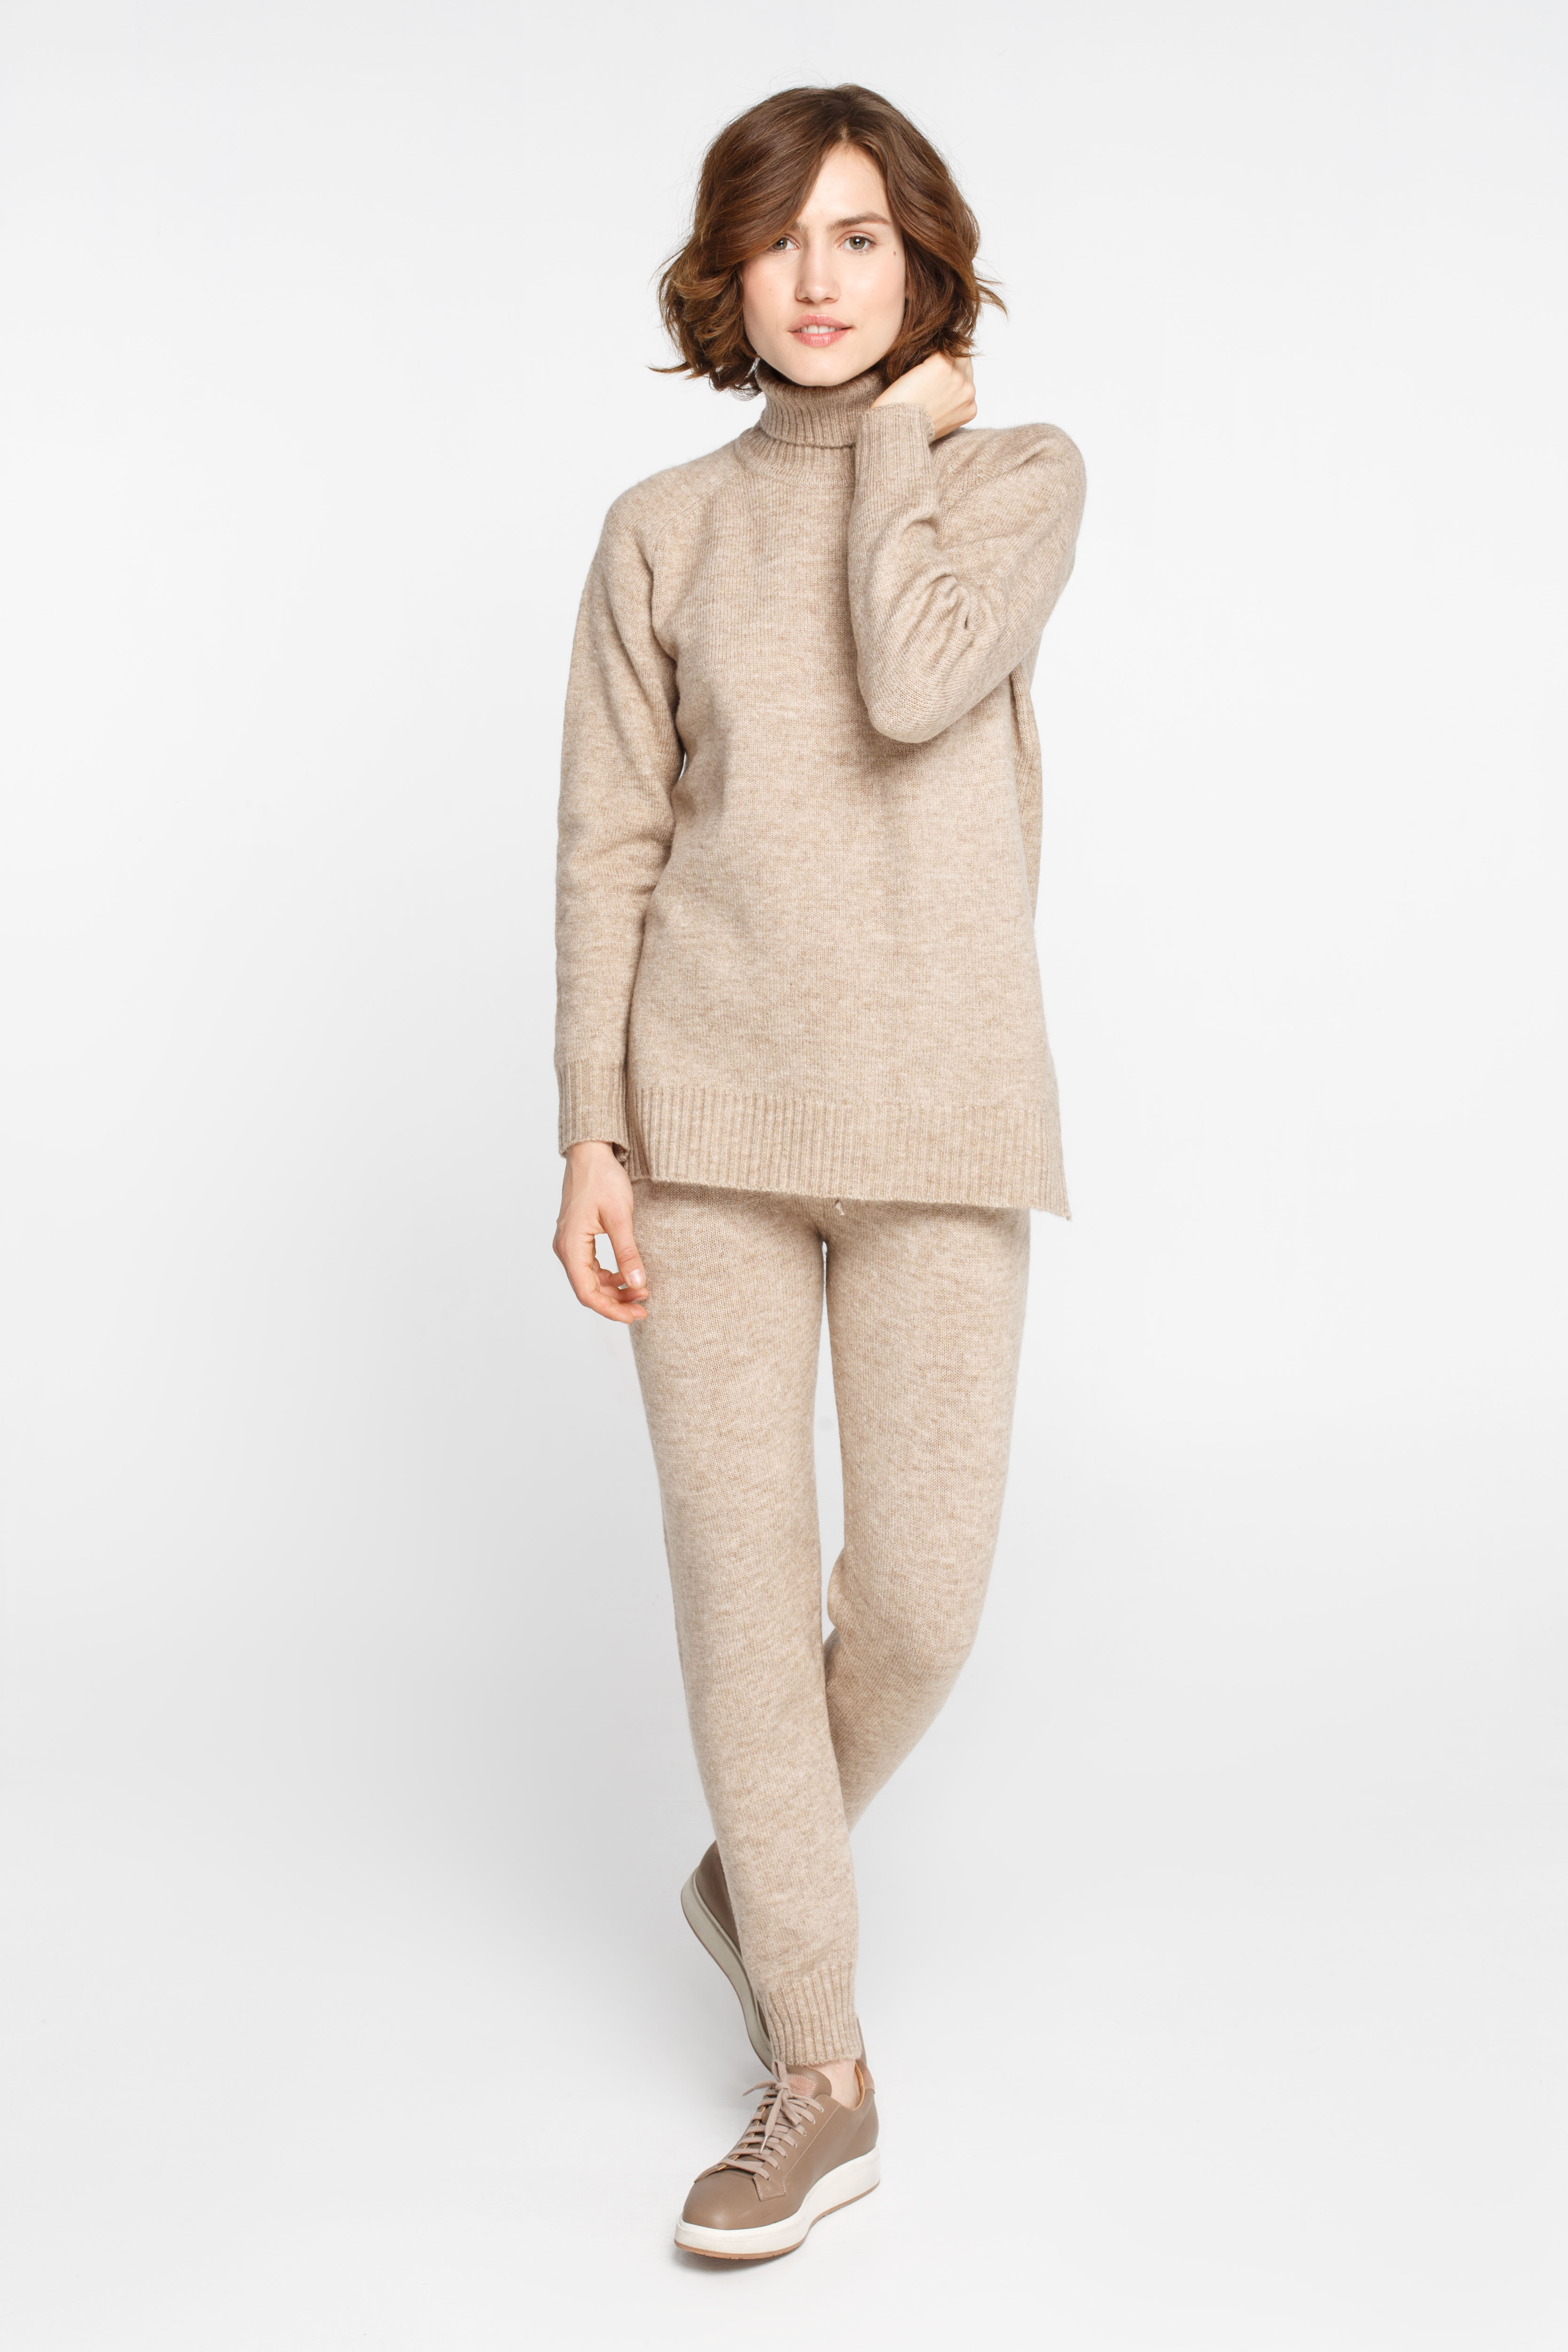 Beige turtleneck sweater with wool, photo 2